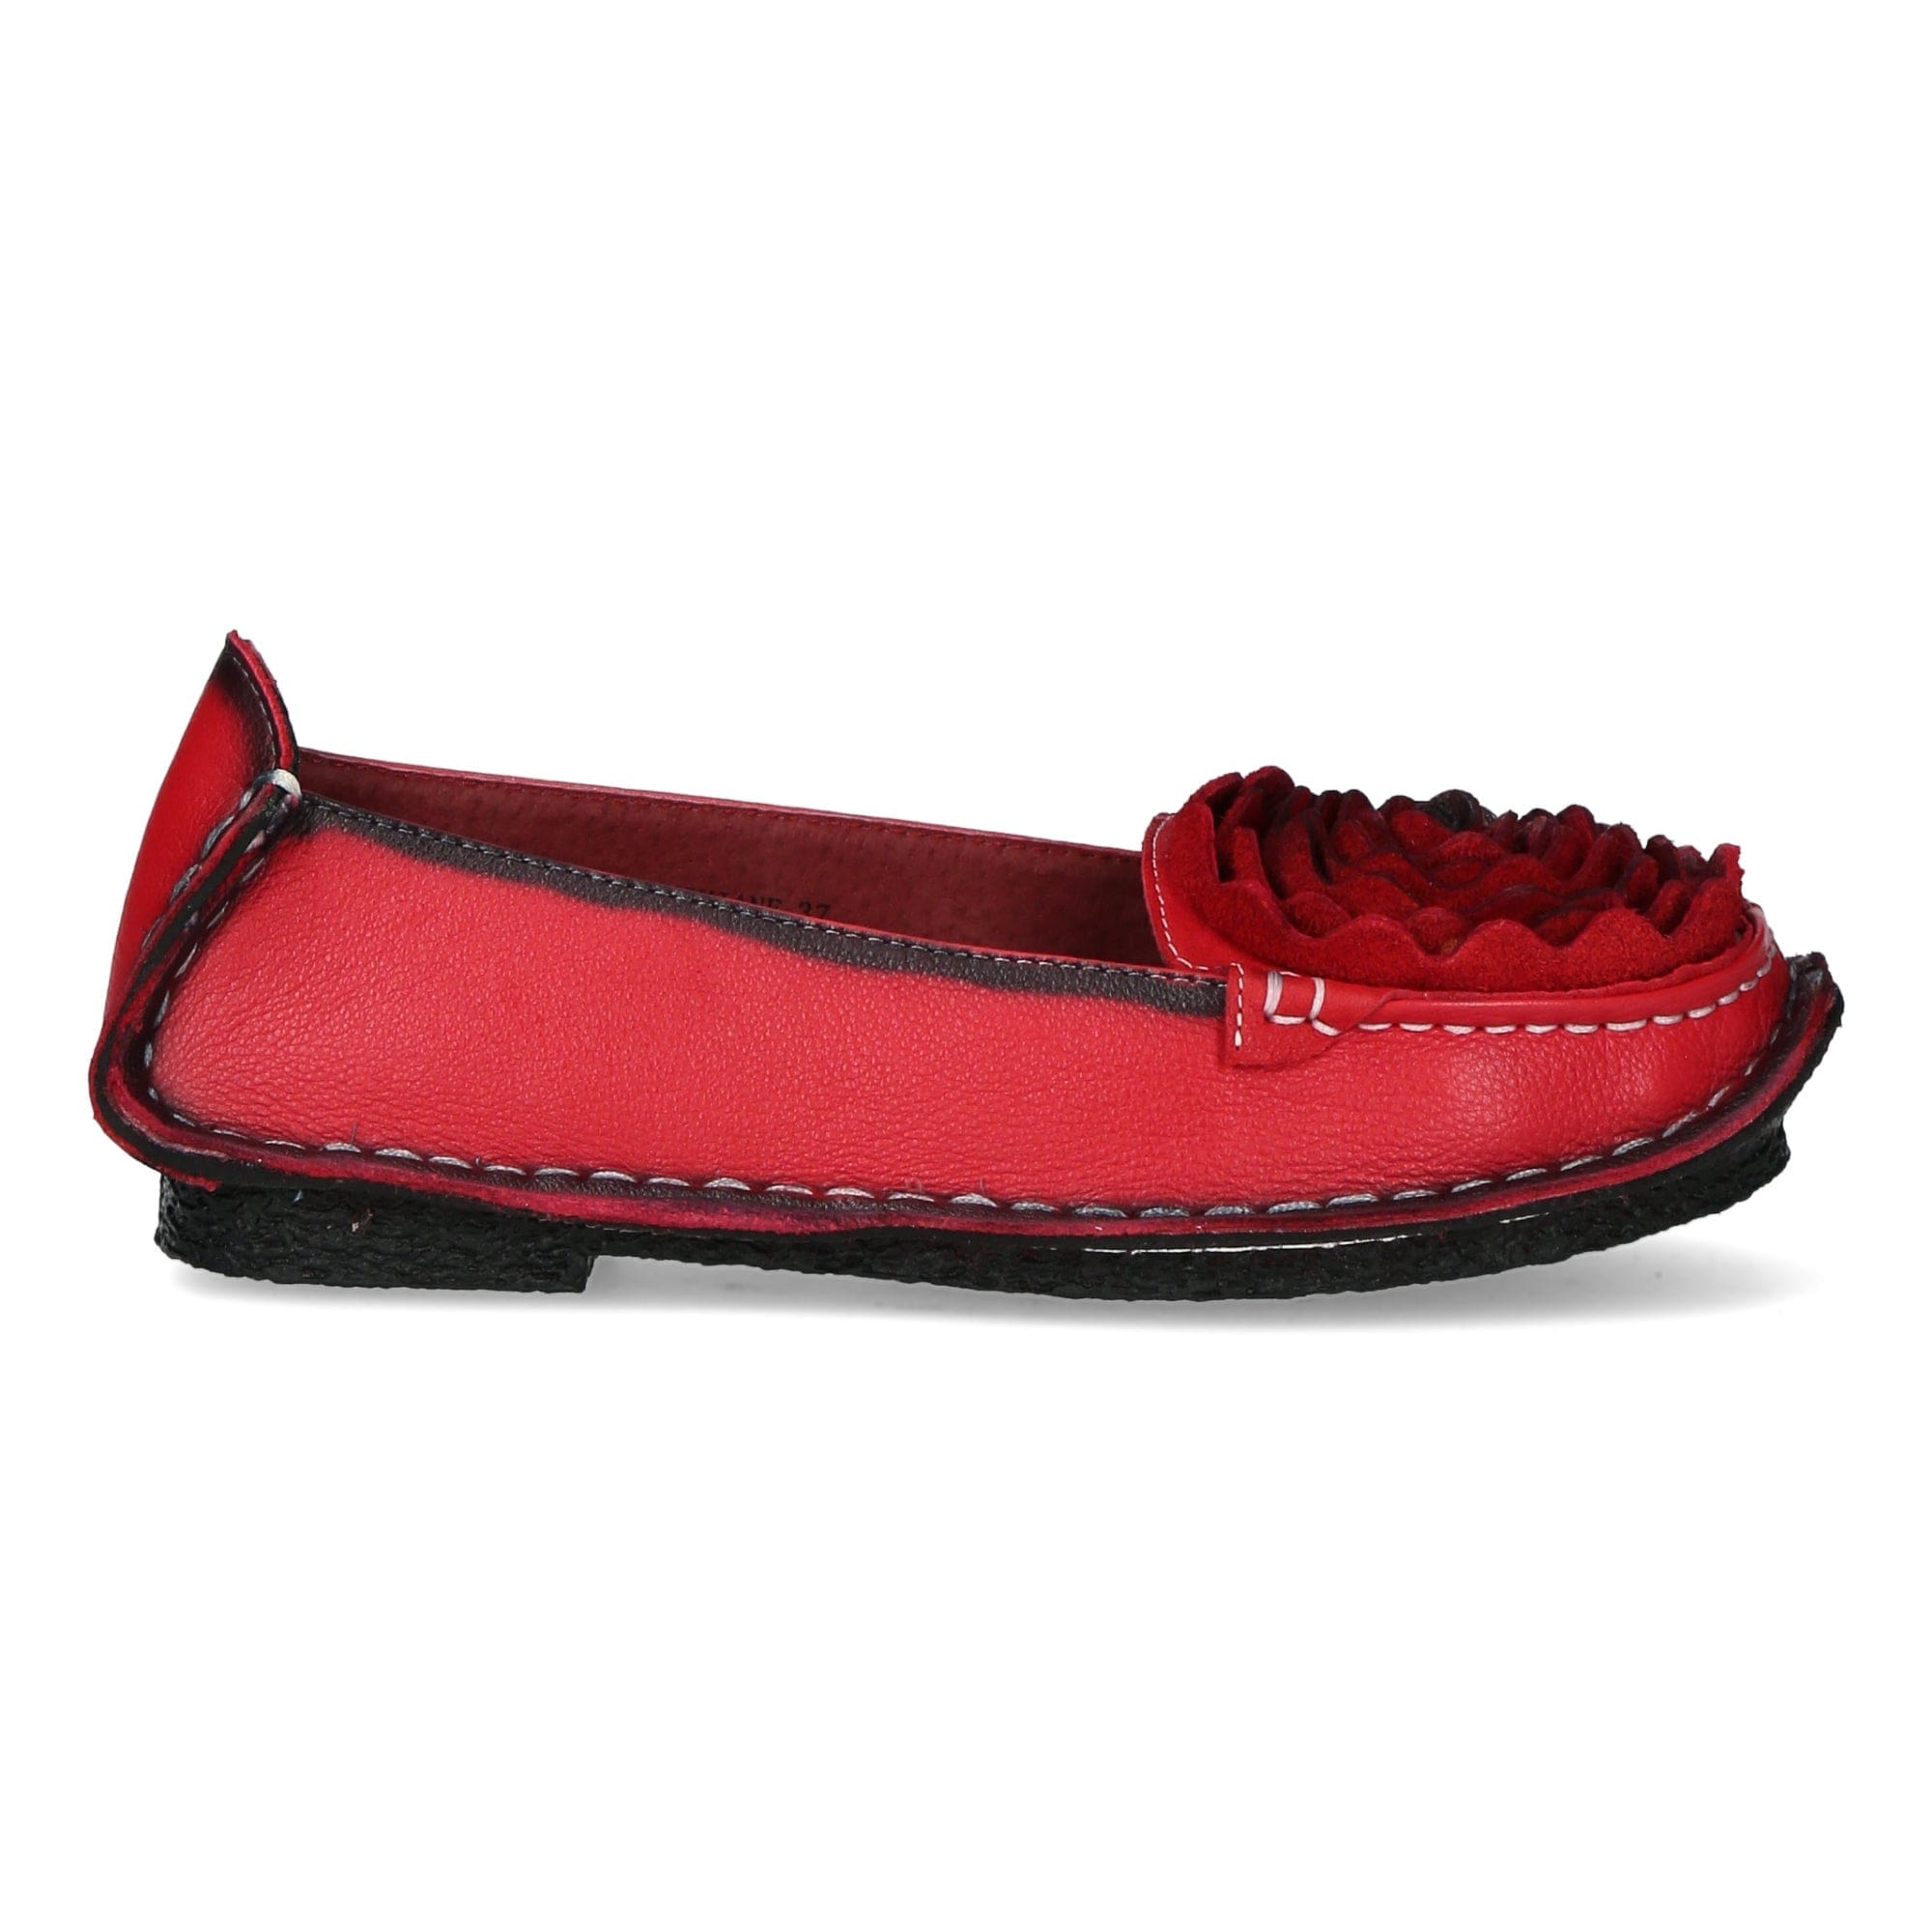 Viviane Shoes - 35 / Red - Loafer